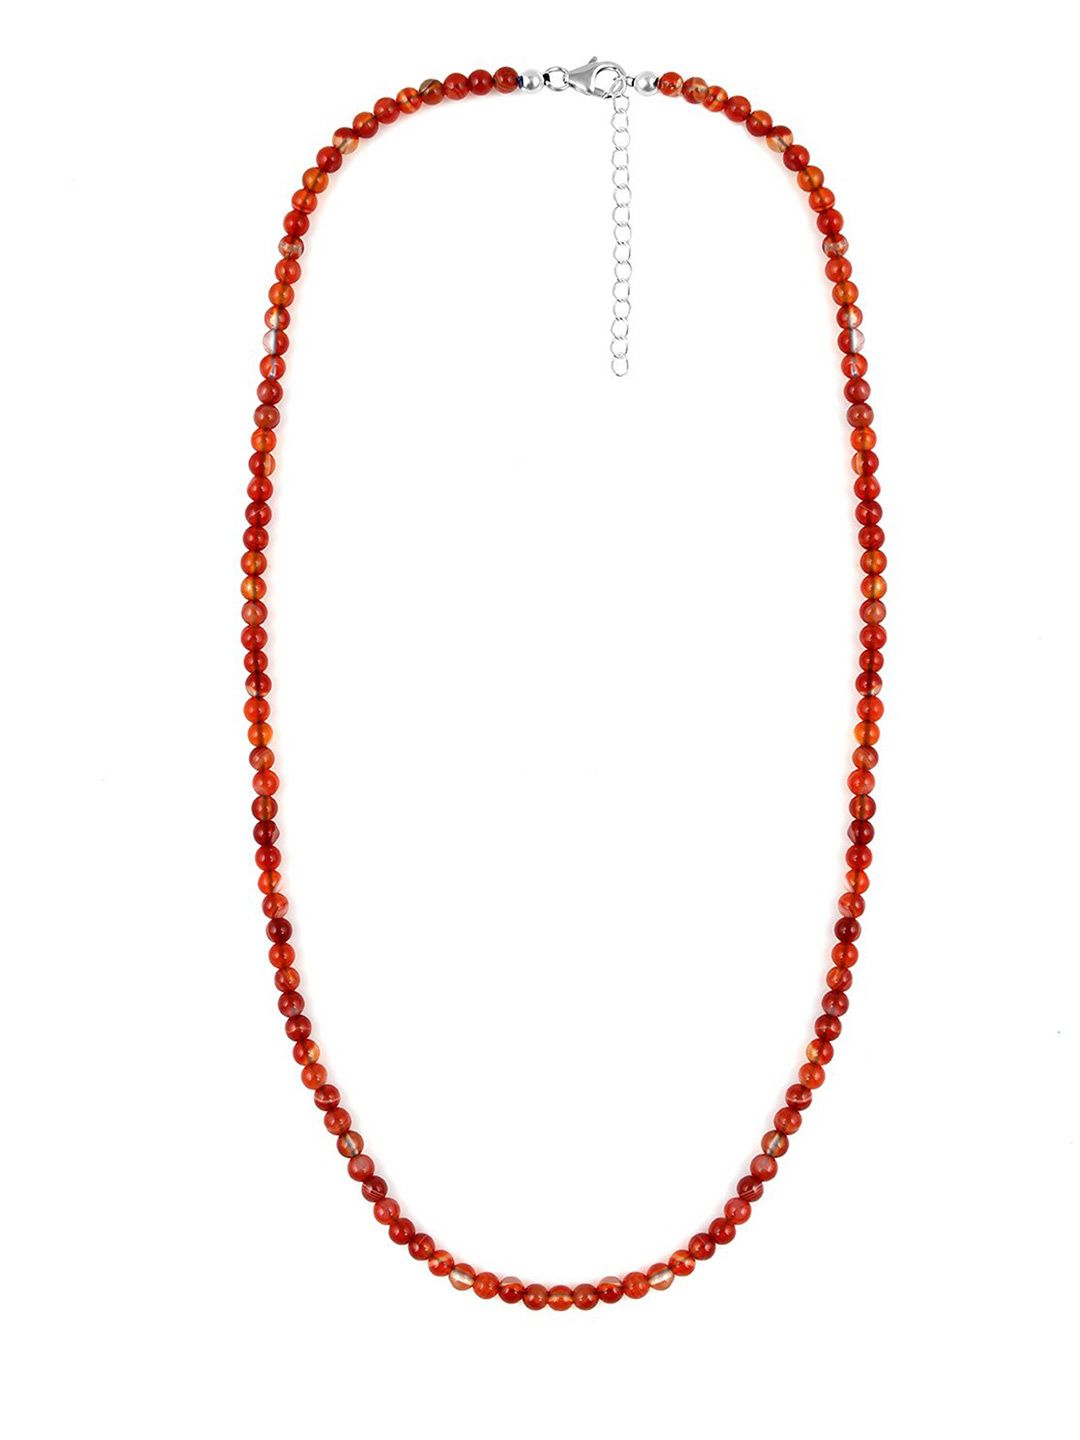 LA SOULA Red Sterling Silver Handcrafted Necklace Price in India